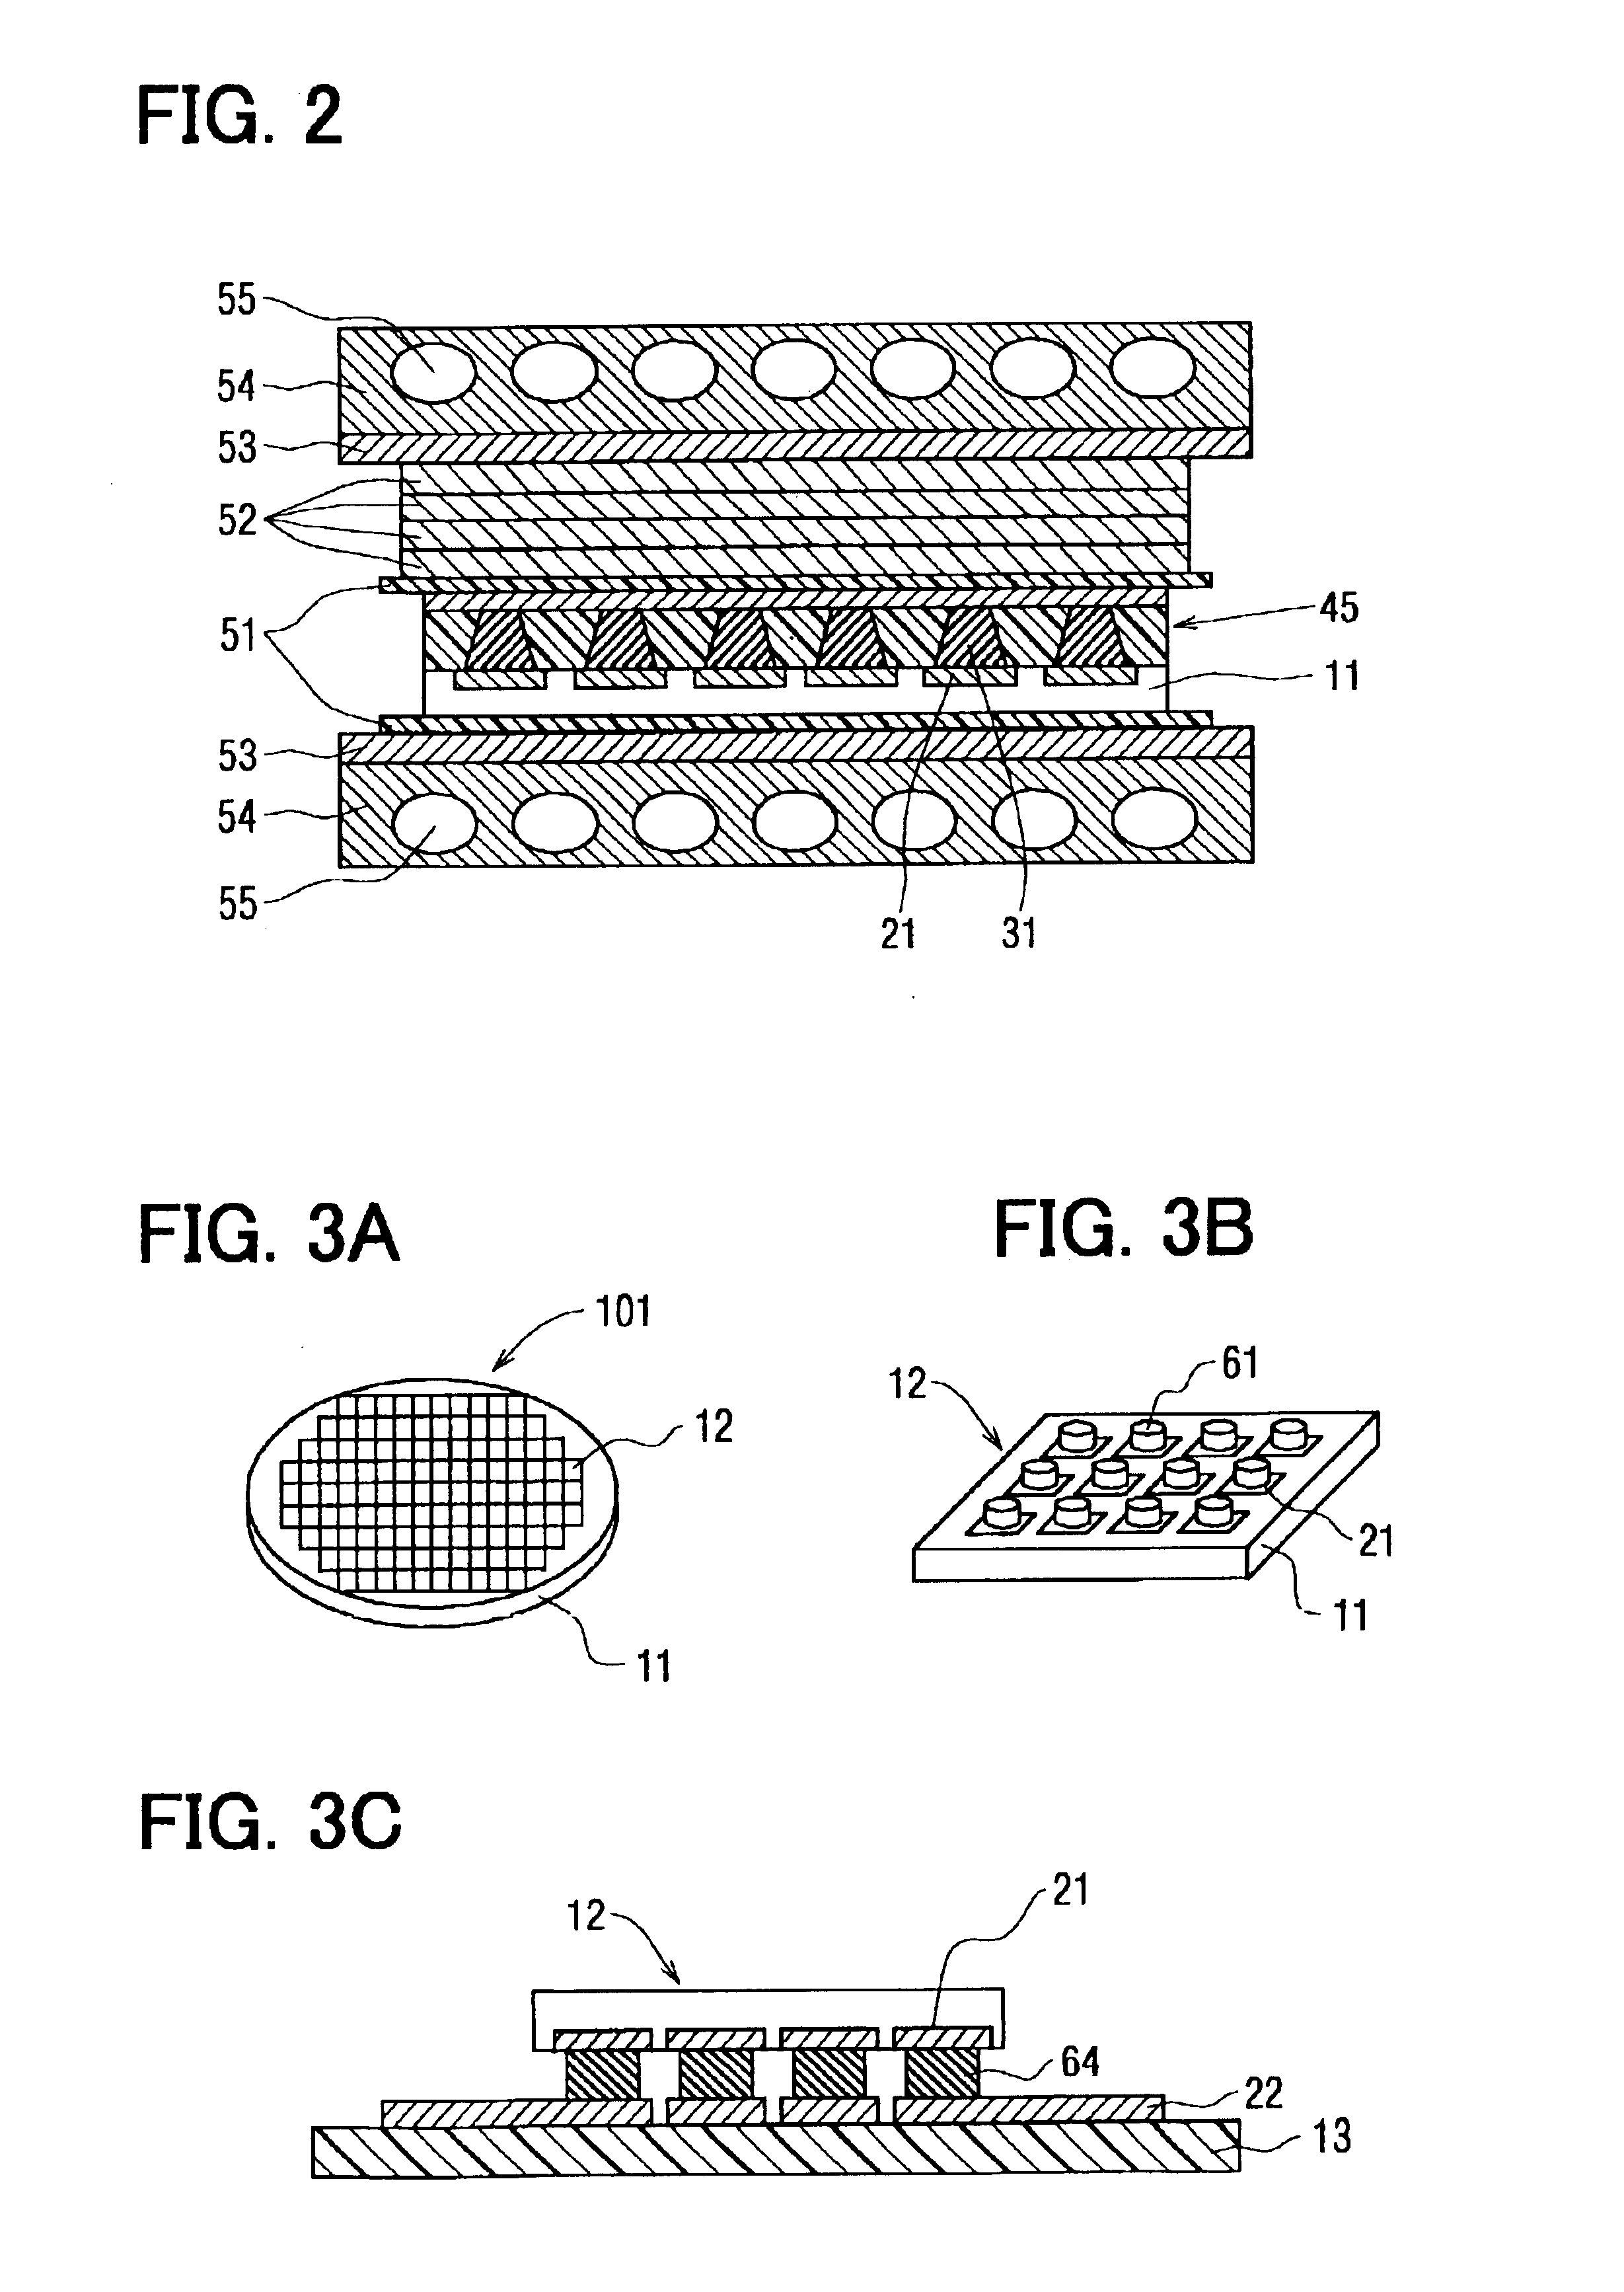 Substrate having a plurality of bumps, method of forming the same, and method of bonding substrate to another